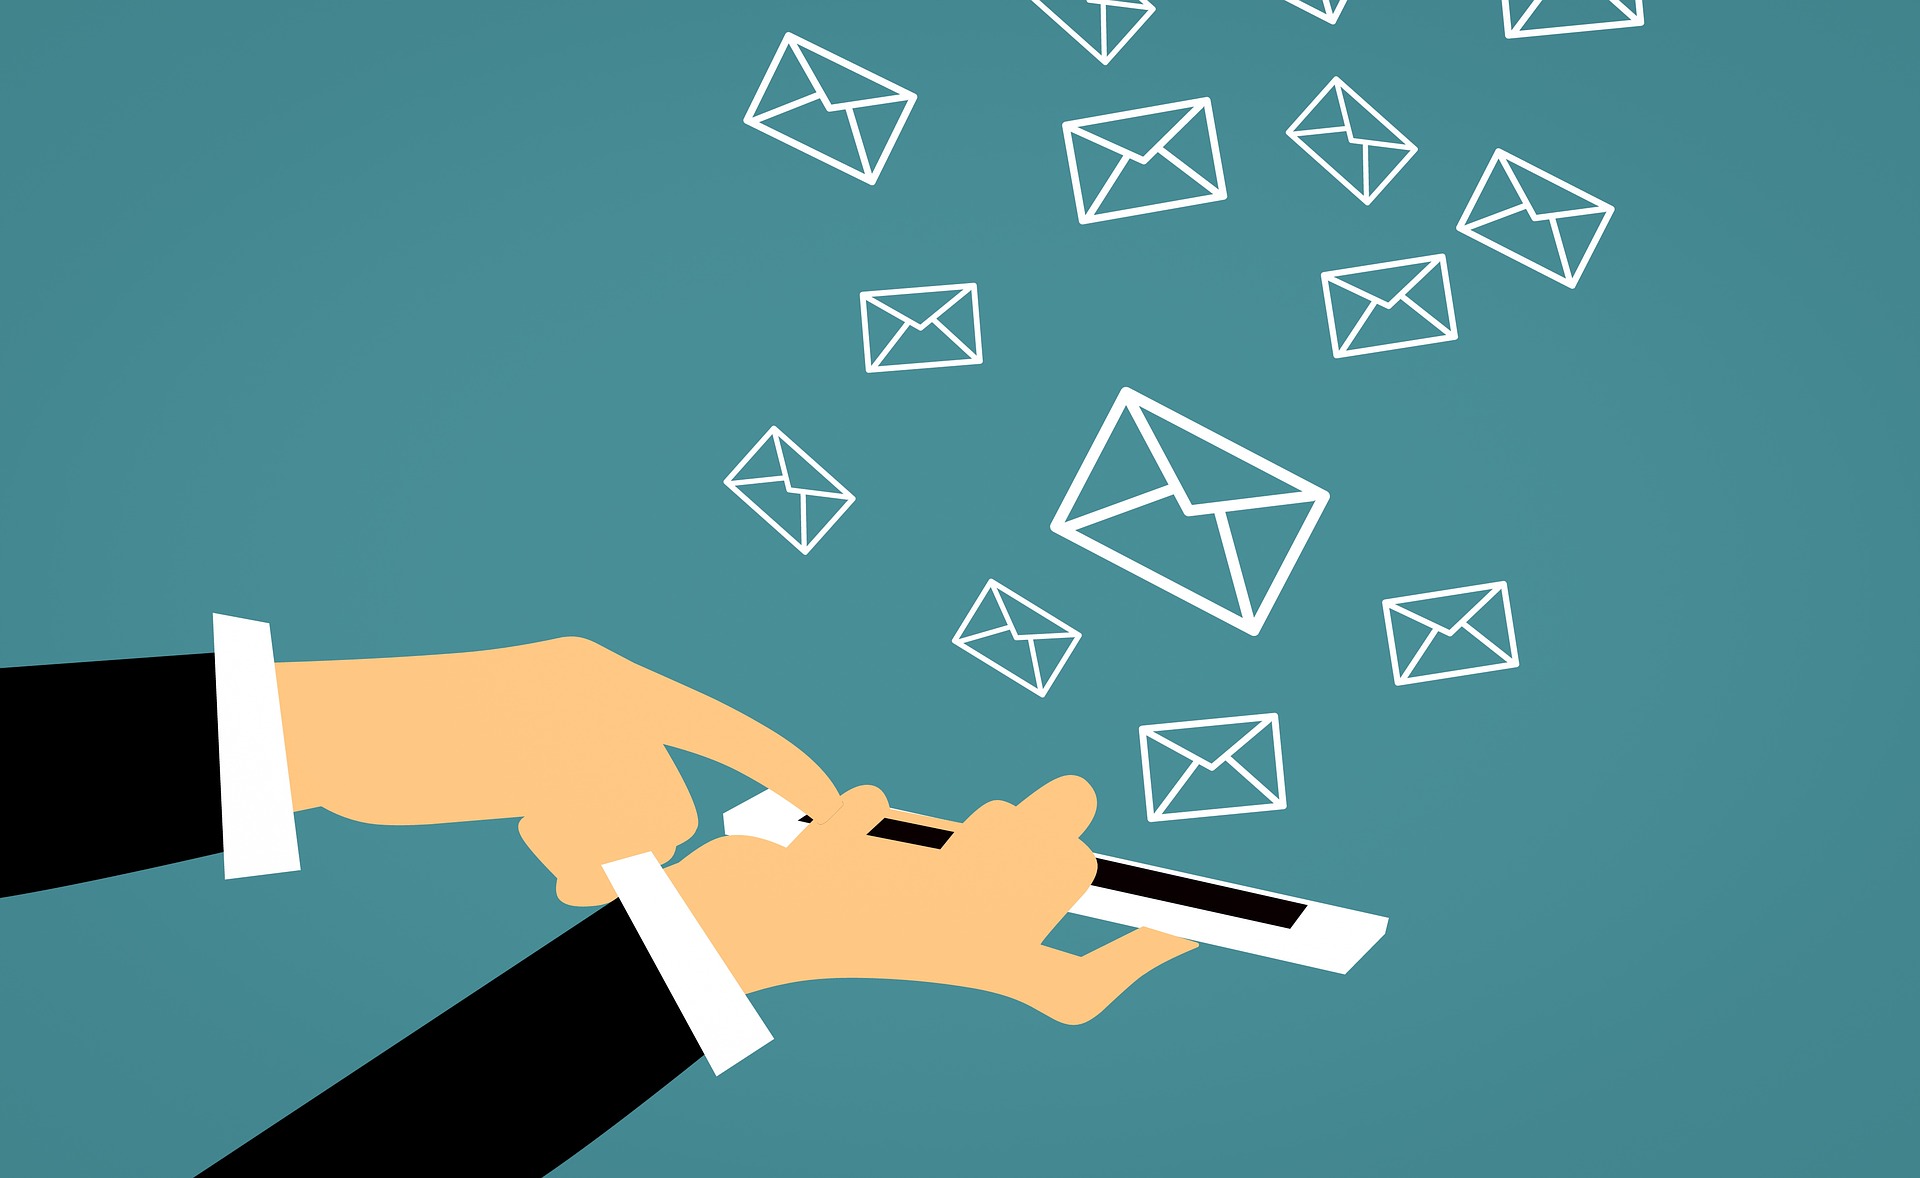 lead management is easy with hubspot email marketing